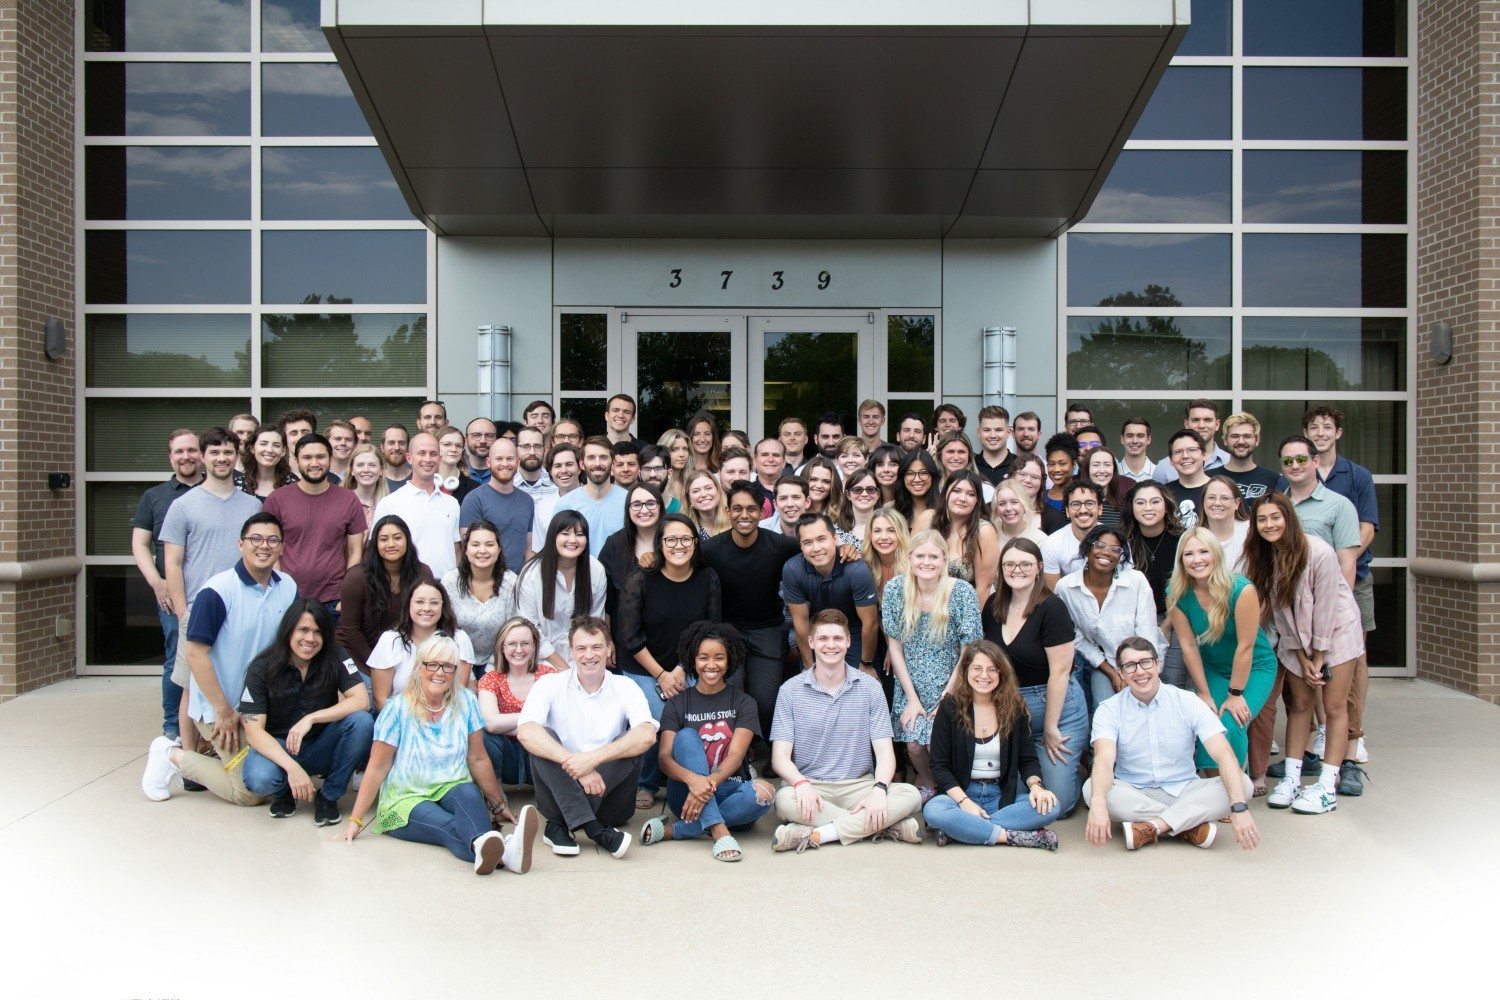 The SupplyPike team has grown exponentially this year!